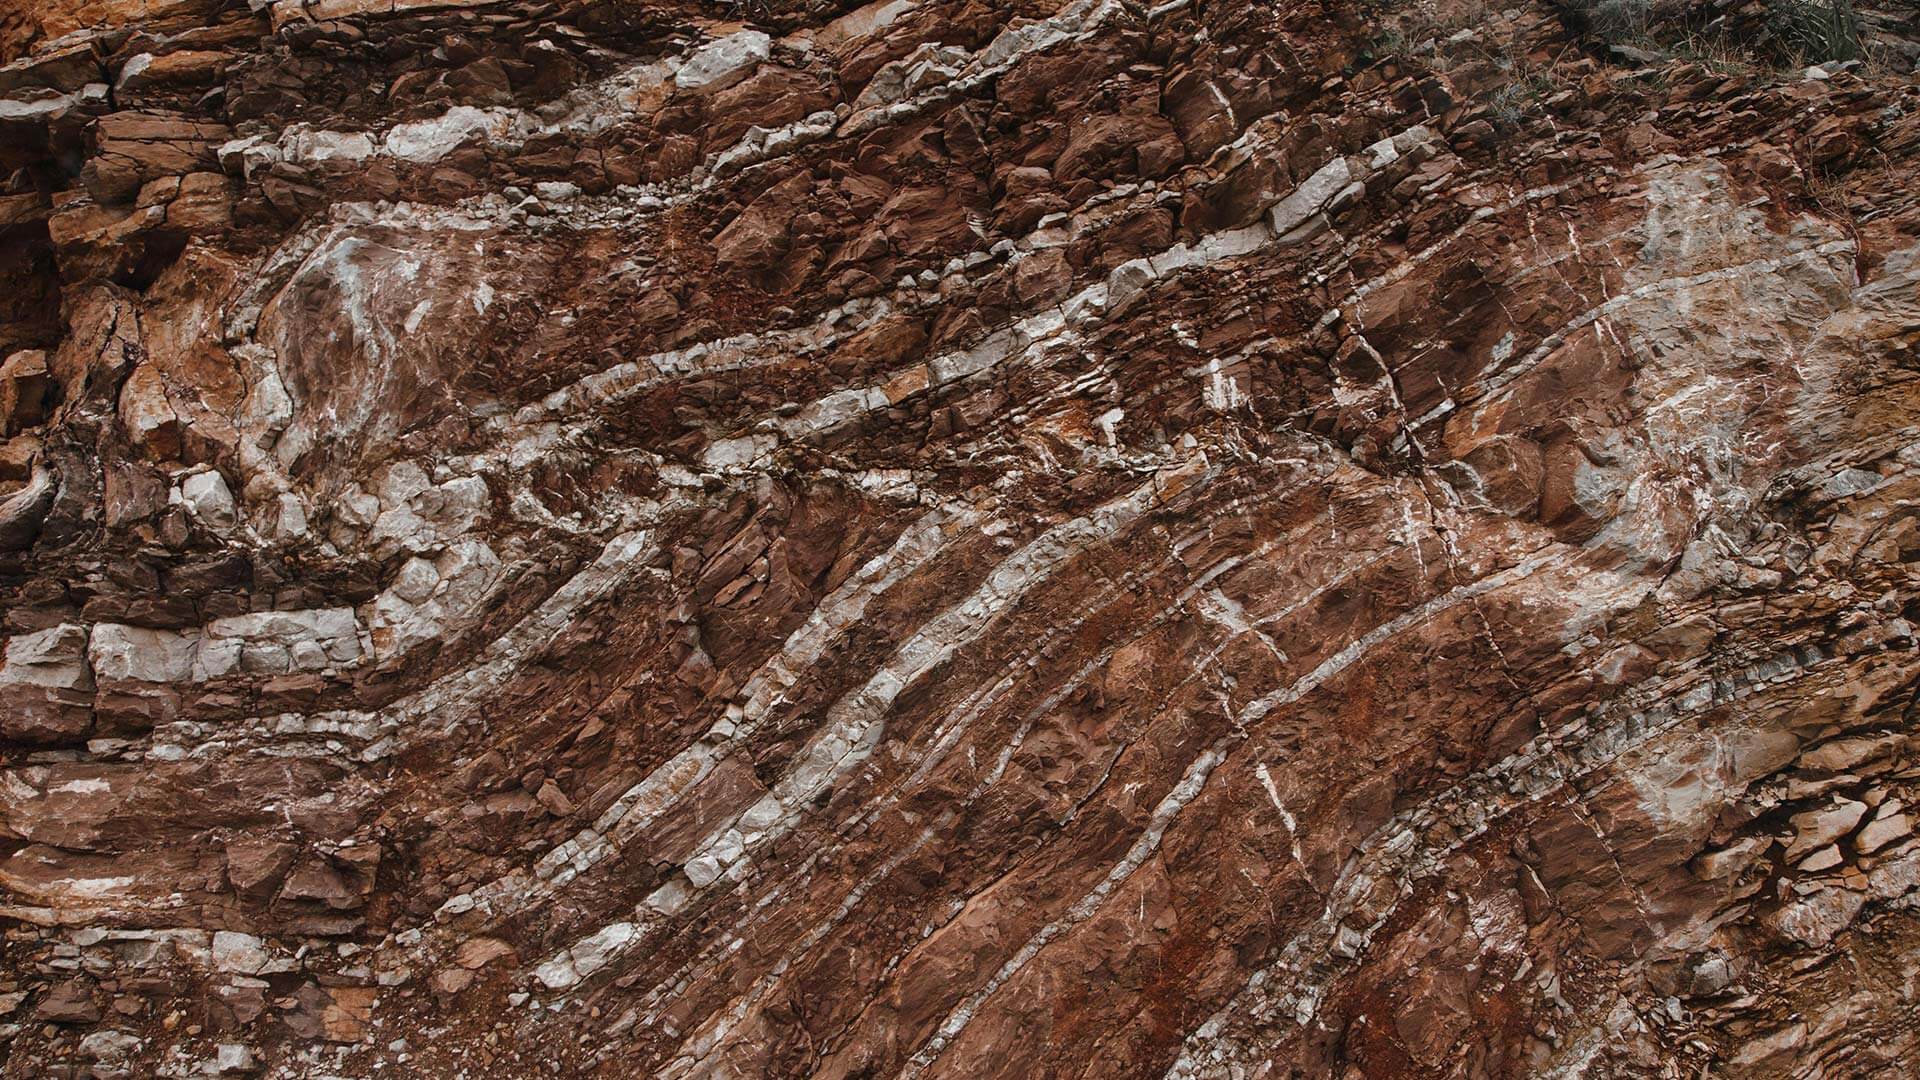 Close-up of layered rock formations with alternating bands of reddish-brown and white colors, showing geological folding patterns.